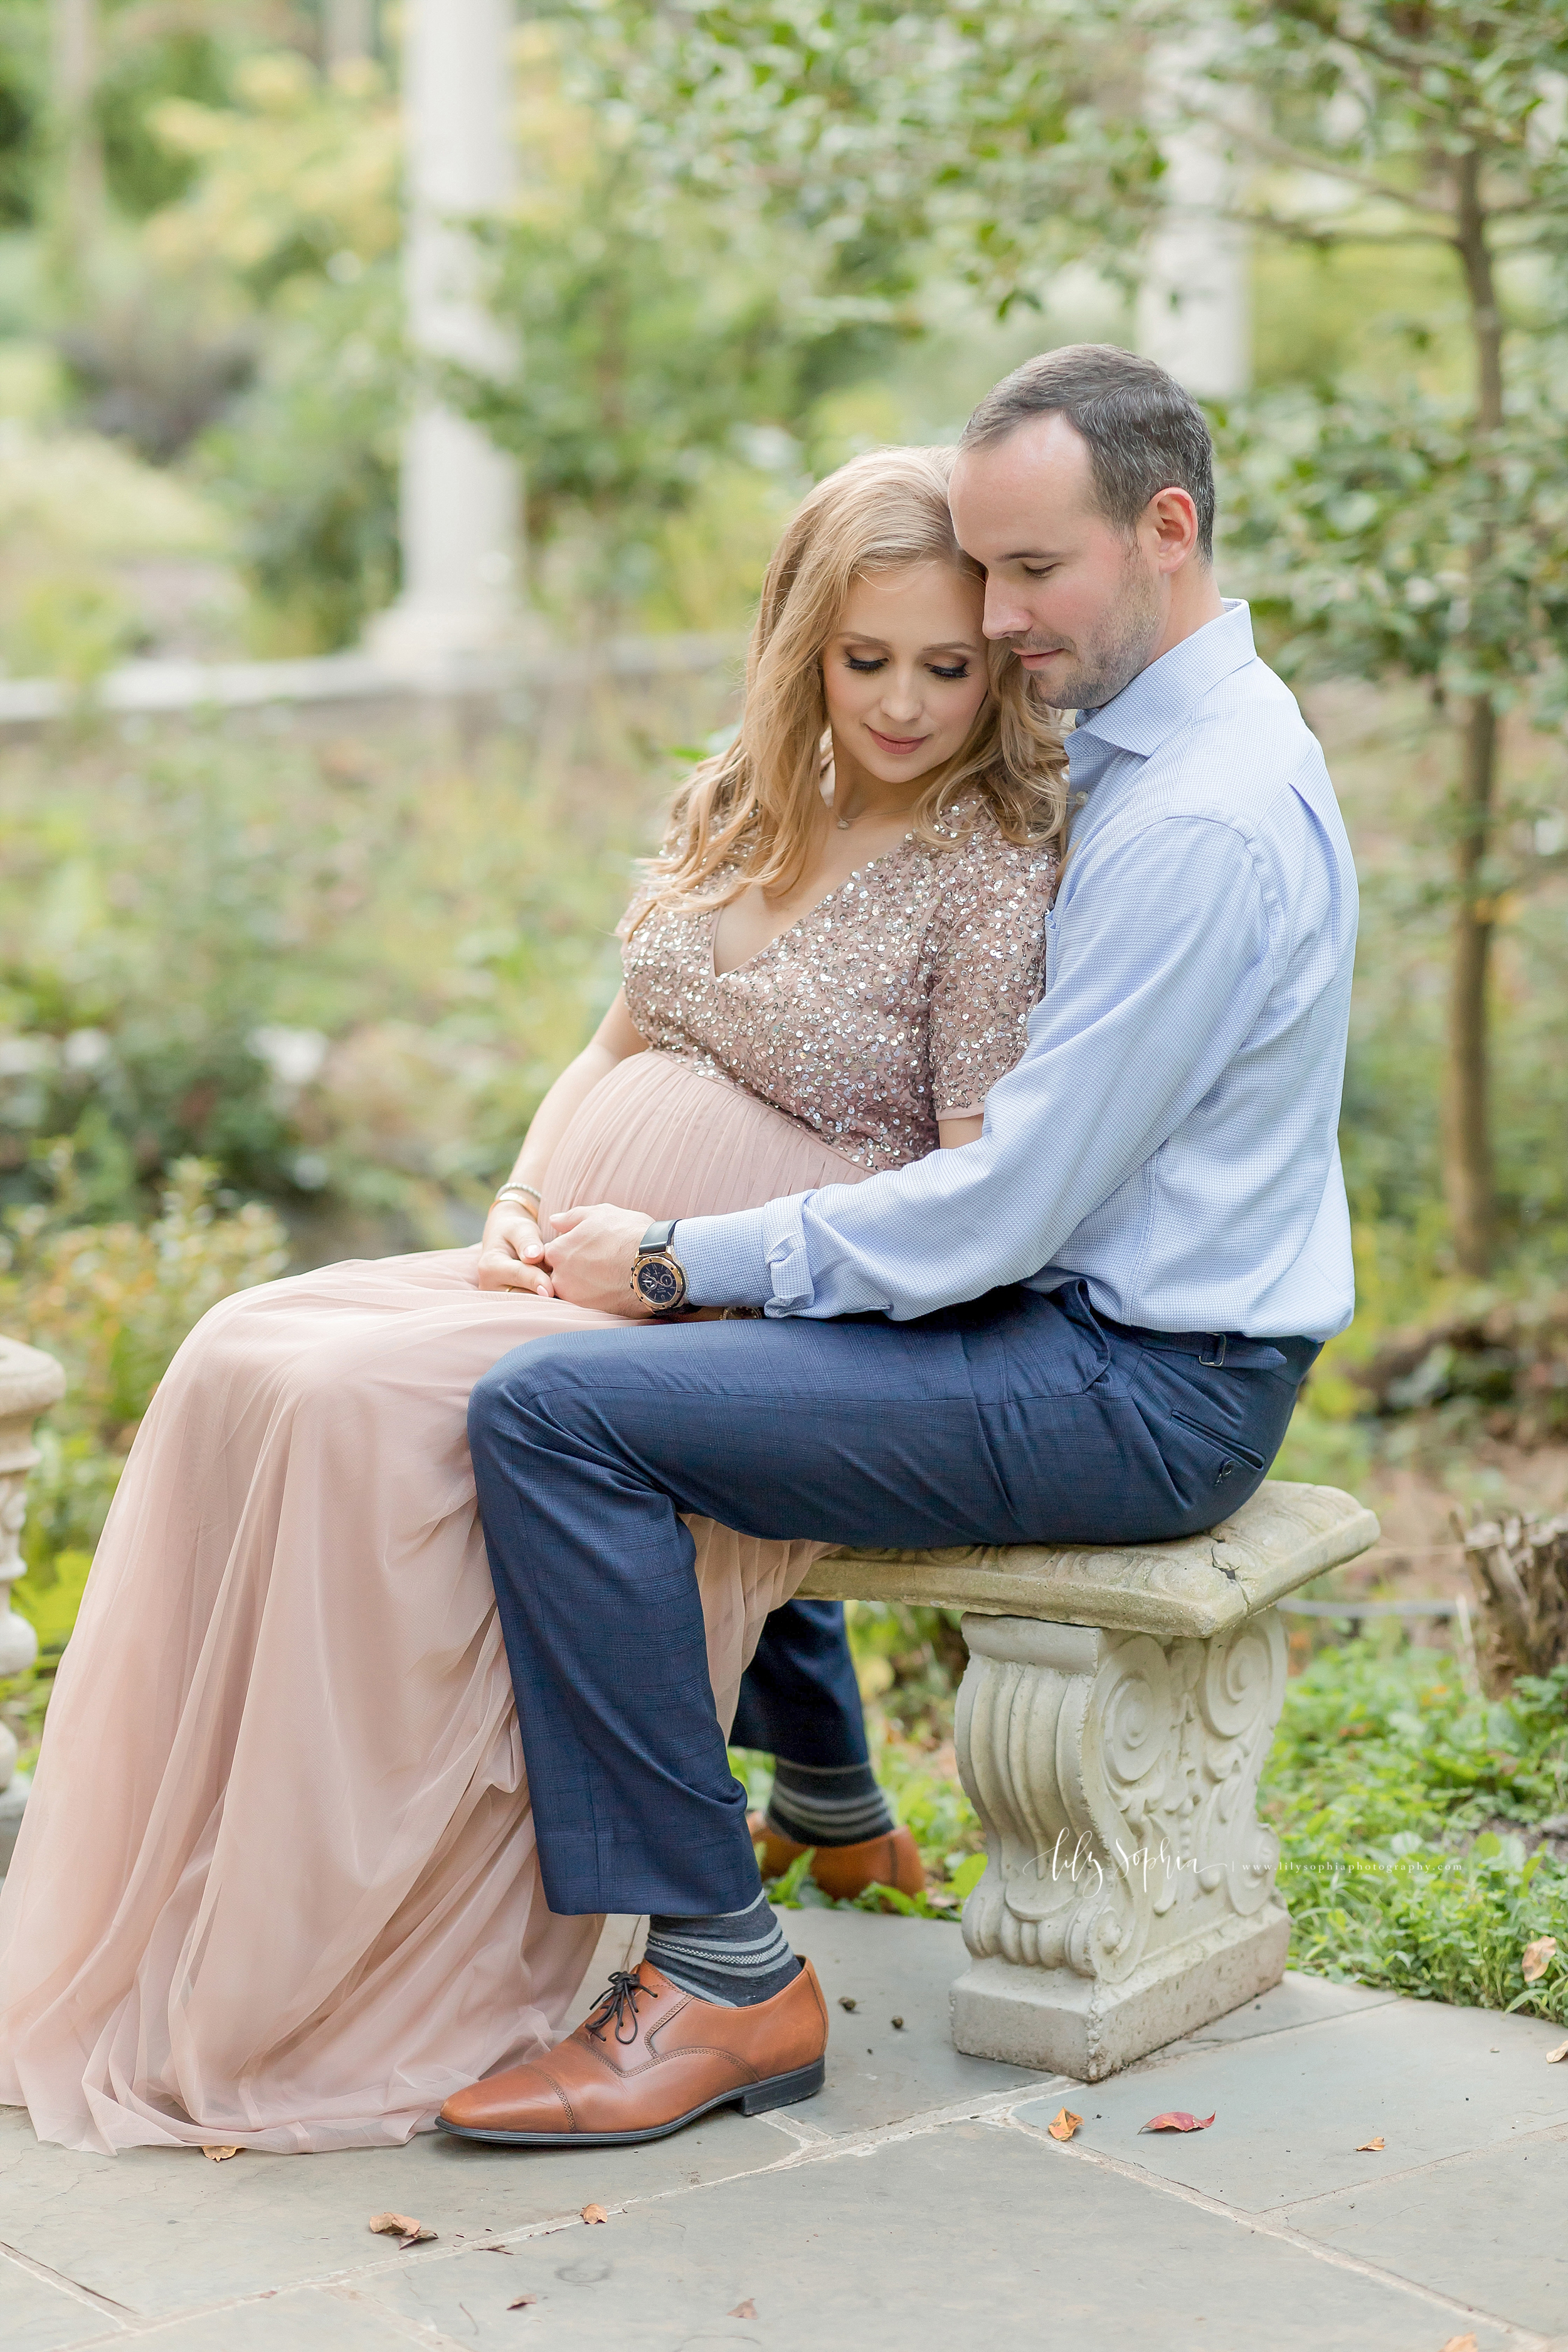 atlanta-buckhead-brookhaven-inman-decatur-lily-sophia-photography-maternity-pregnancy-photographer-portraits-studio-grant-park-intown-couple-russian-expecting-baby-boy-outdoors-gardens-sunset-fall_0661.jpg